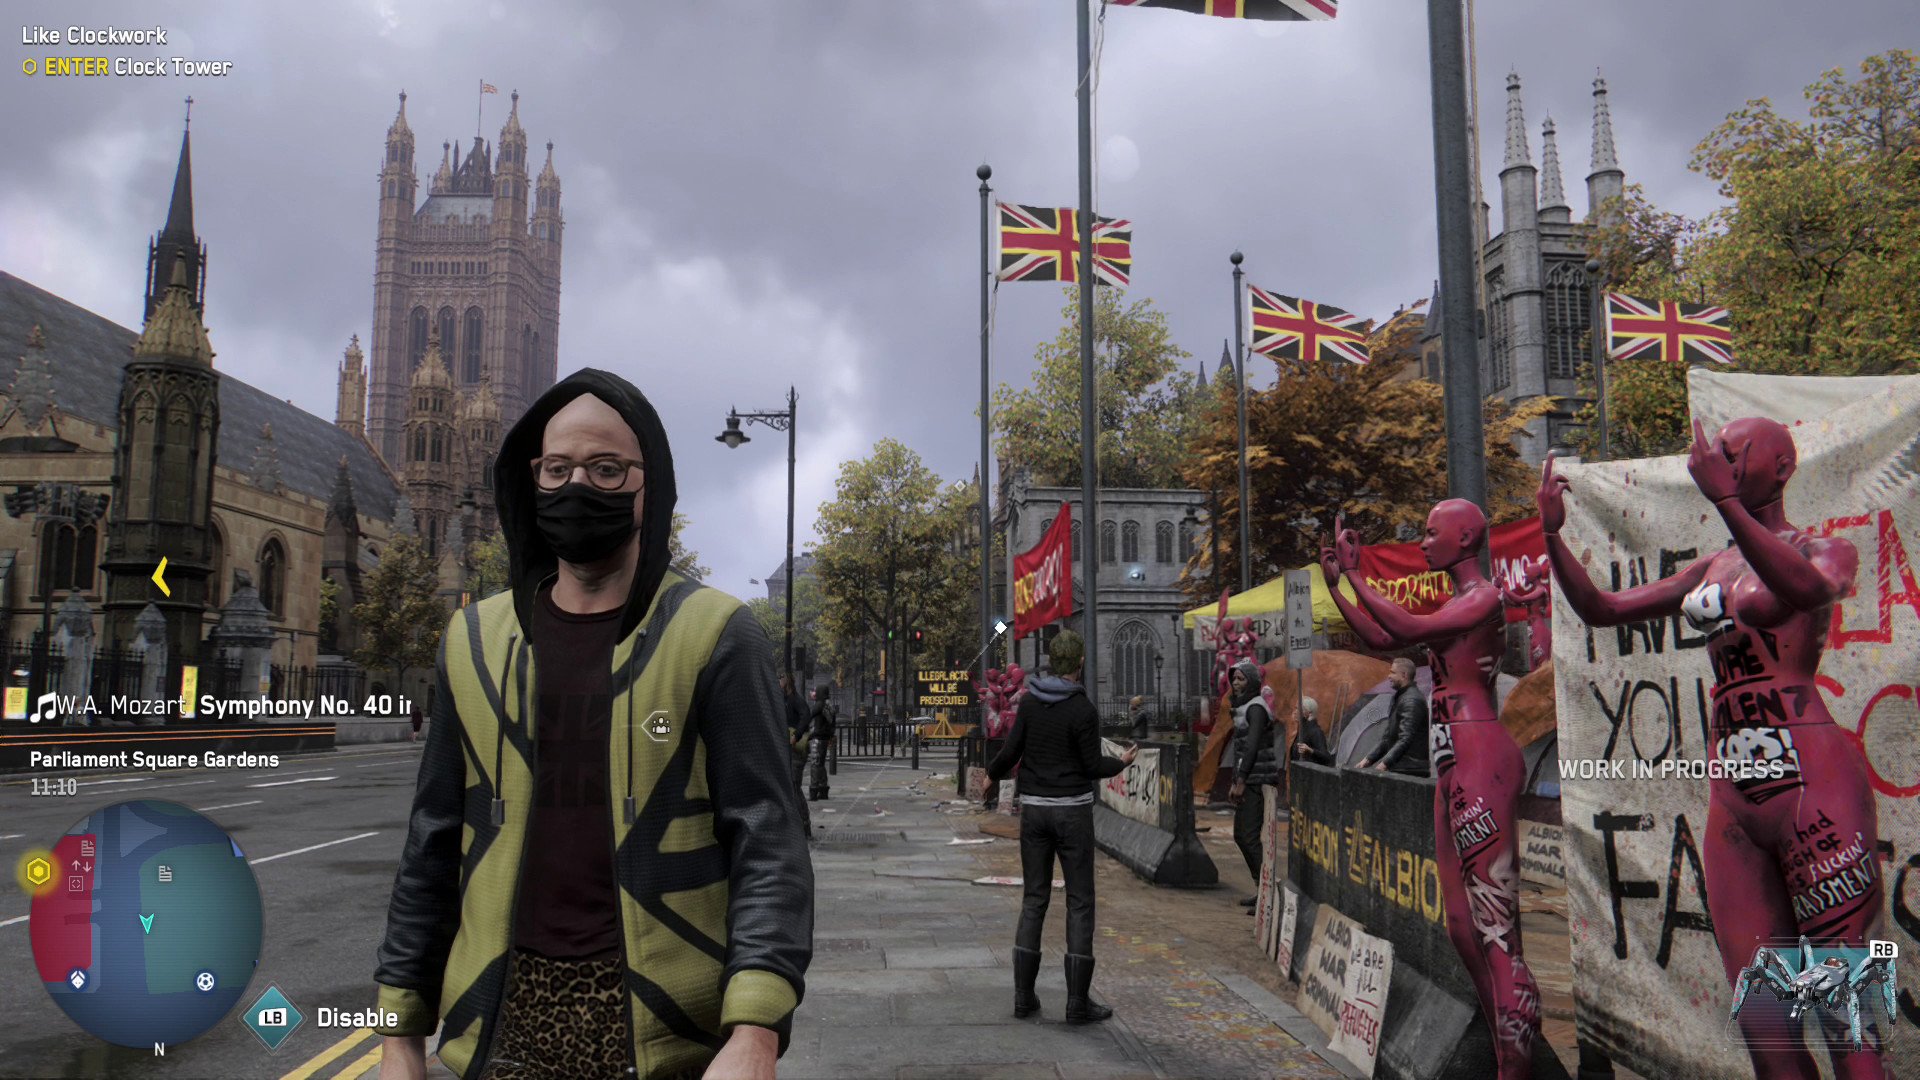 Watch Dogs: Legion – Extensive New Gameplay Footage Released